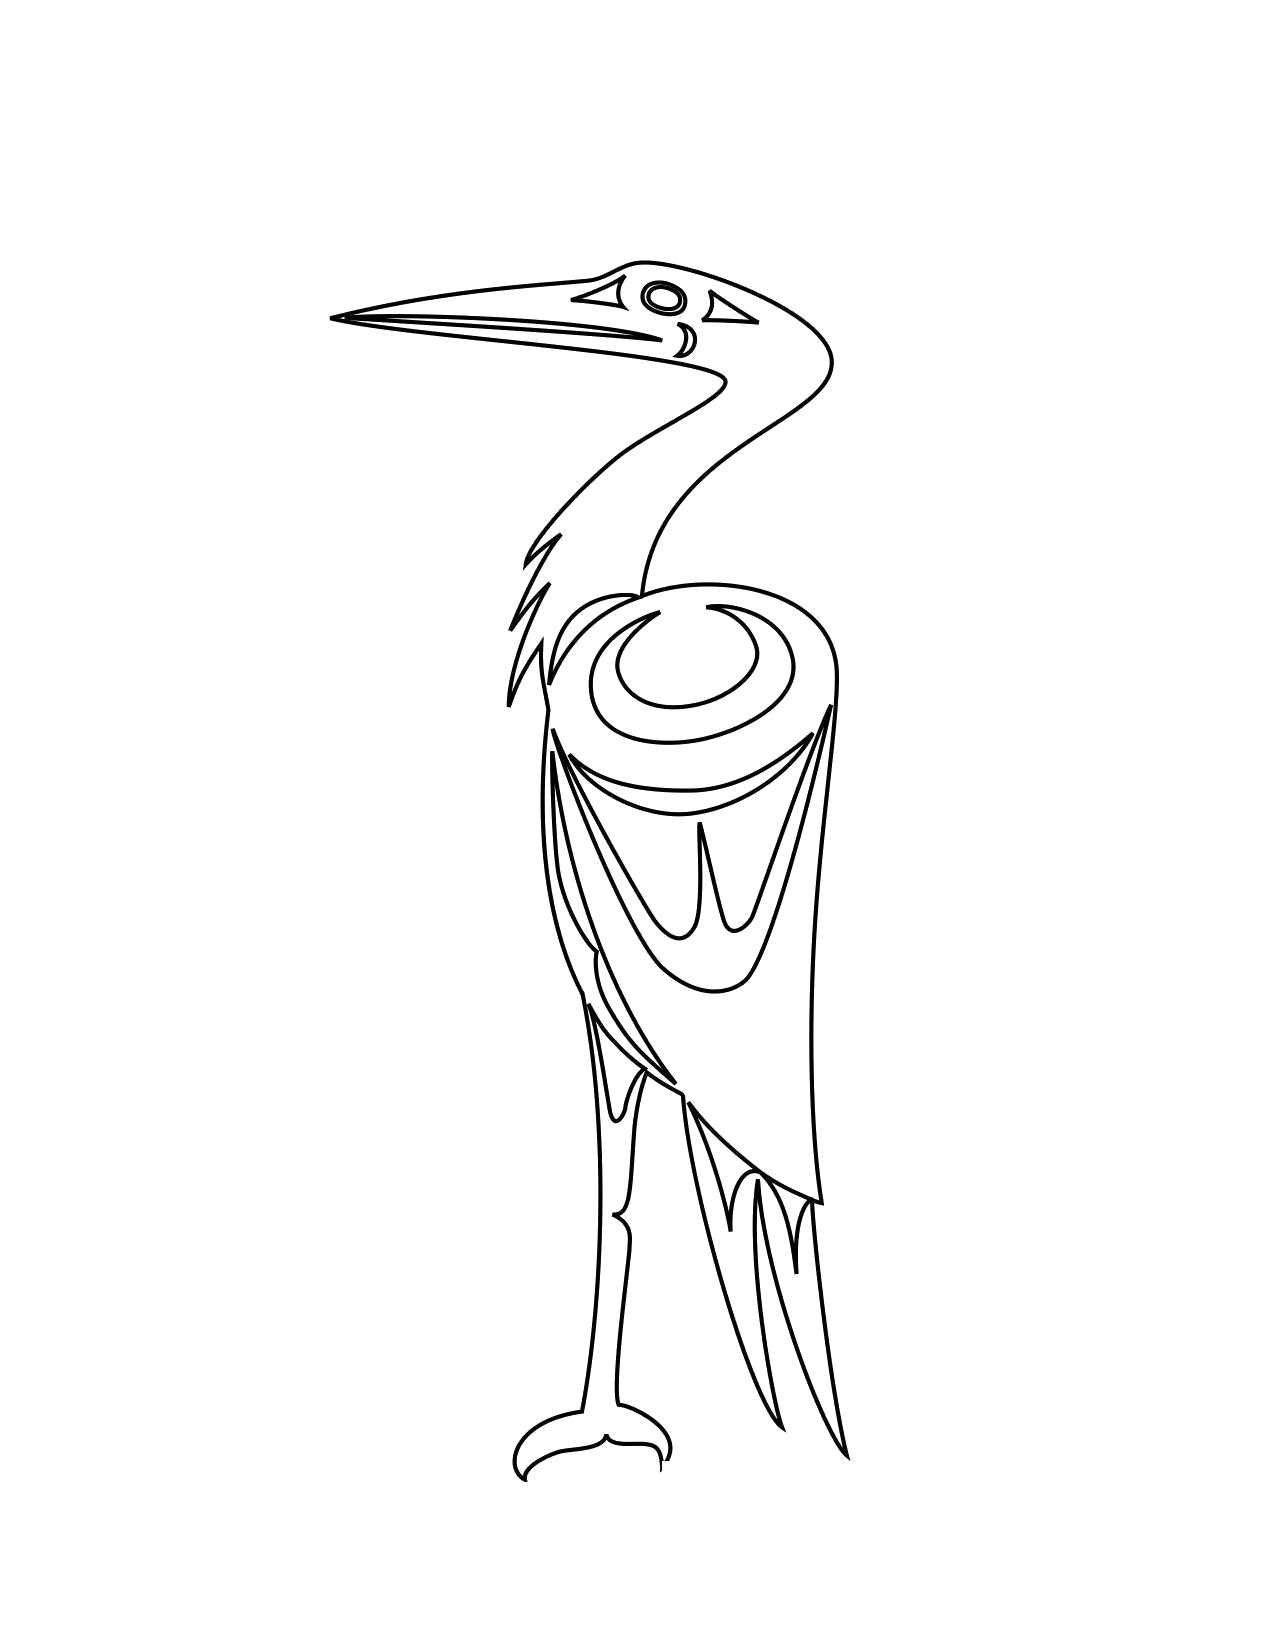 Coloring Heron on one leg. Category The contours for cutting out the birds. Tags:  Heron.